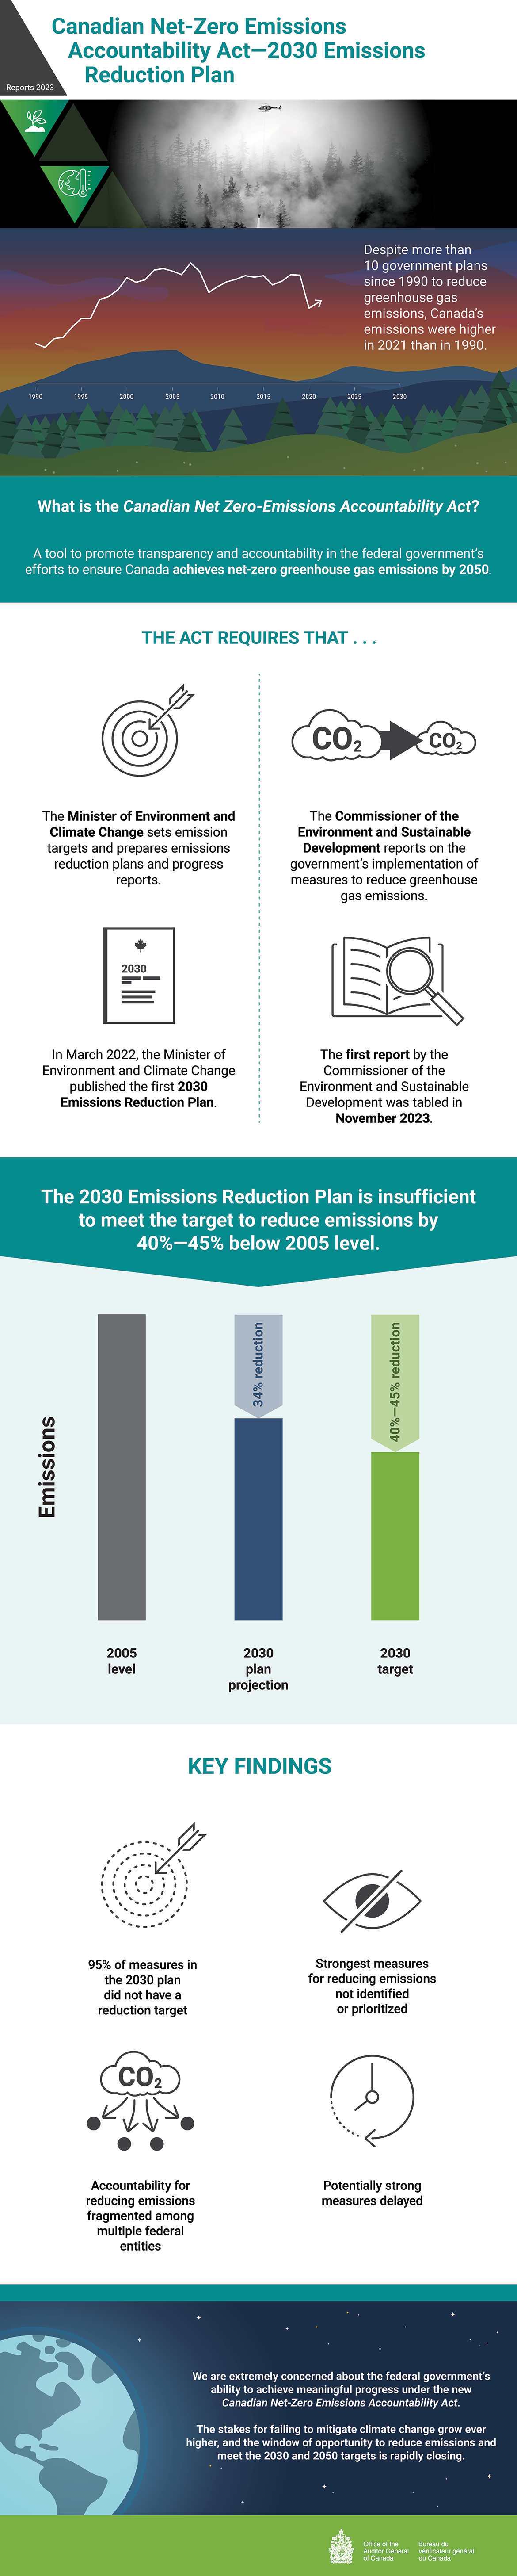 Infographic about the 2023 audit report on Canadian Net-Zero Emissions Accountability Act—2030 Emissions Reduction Plan